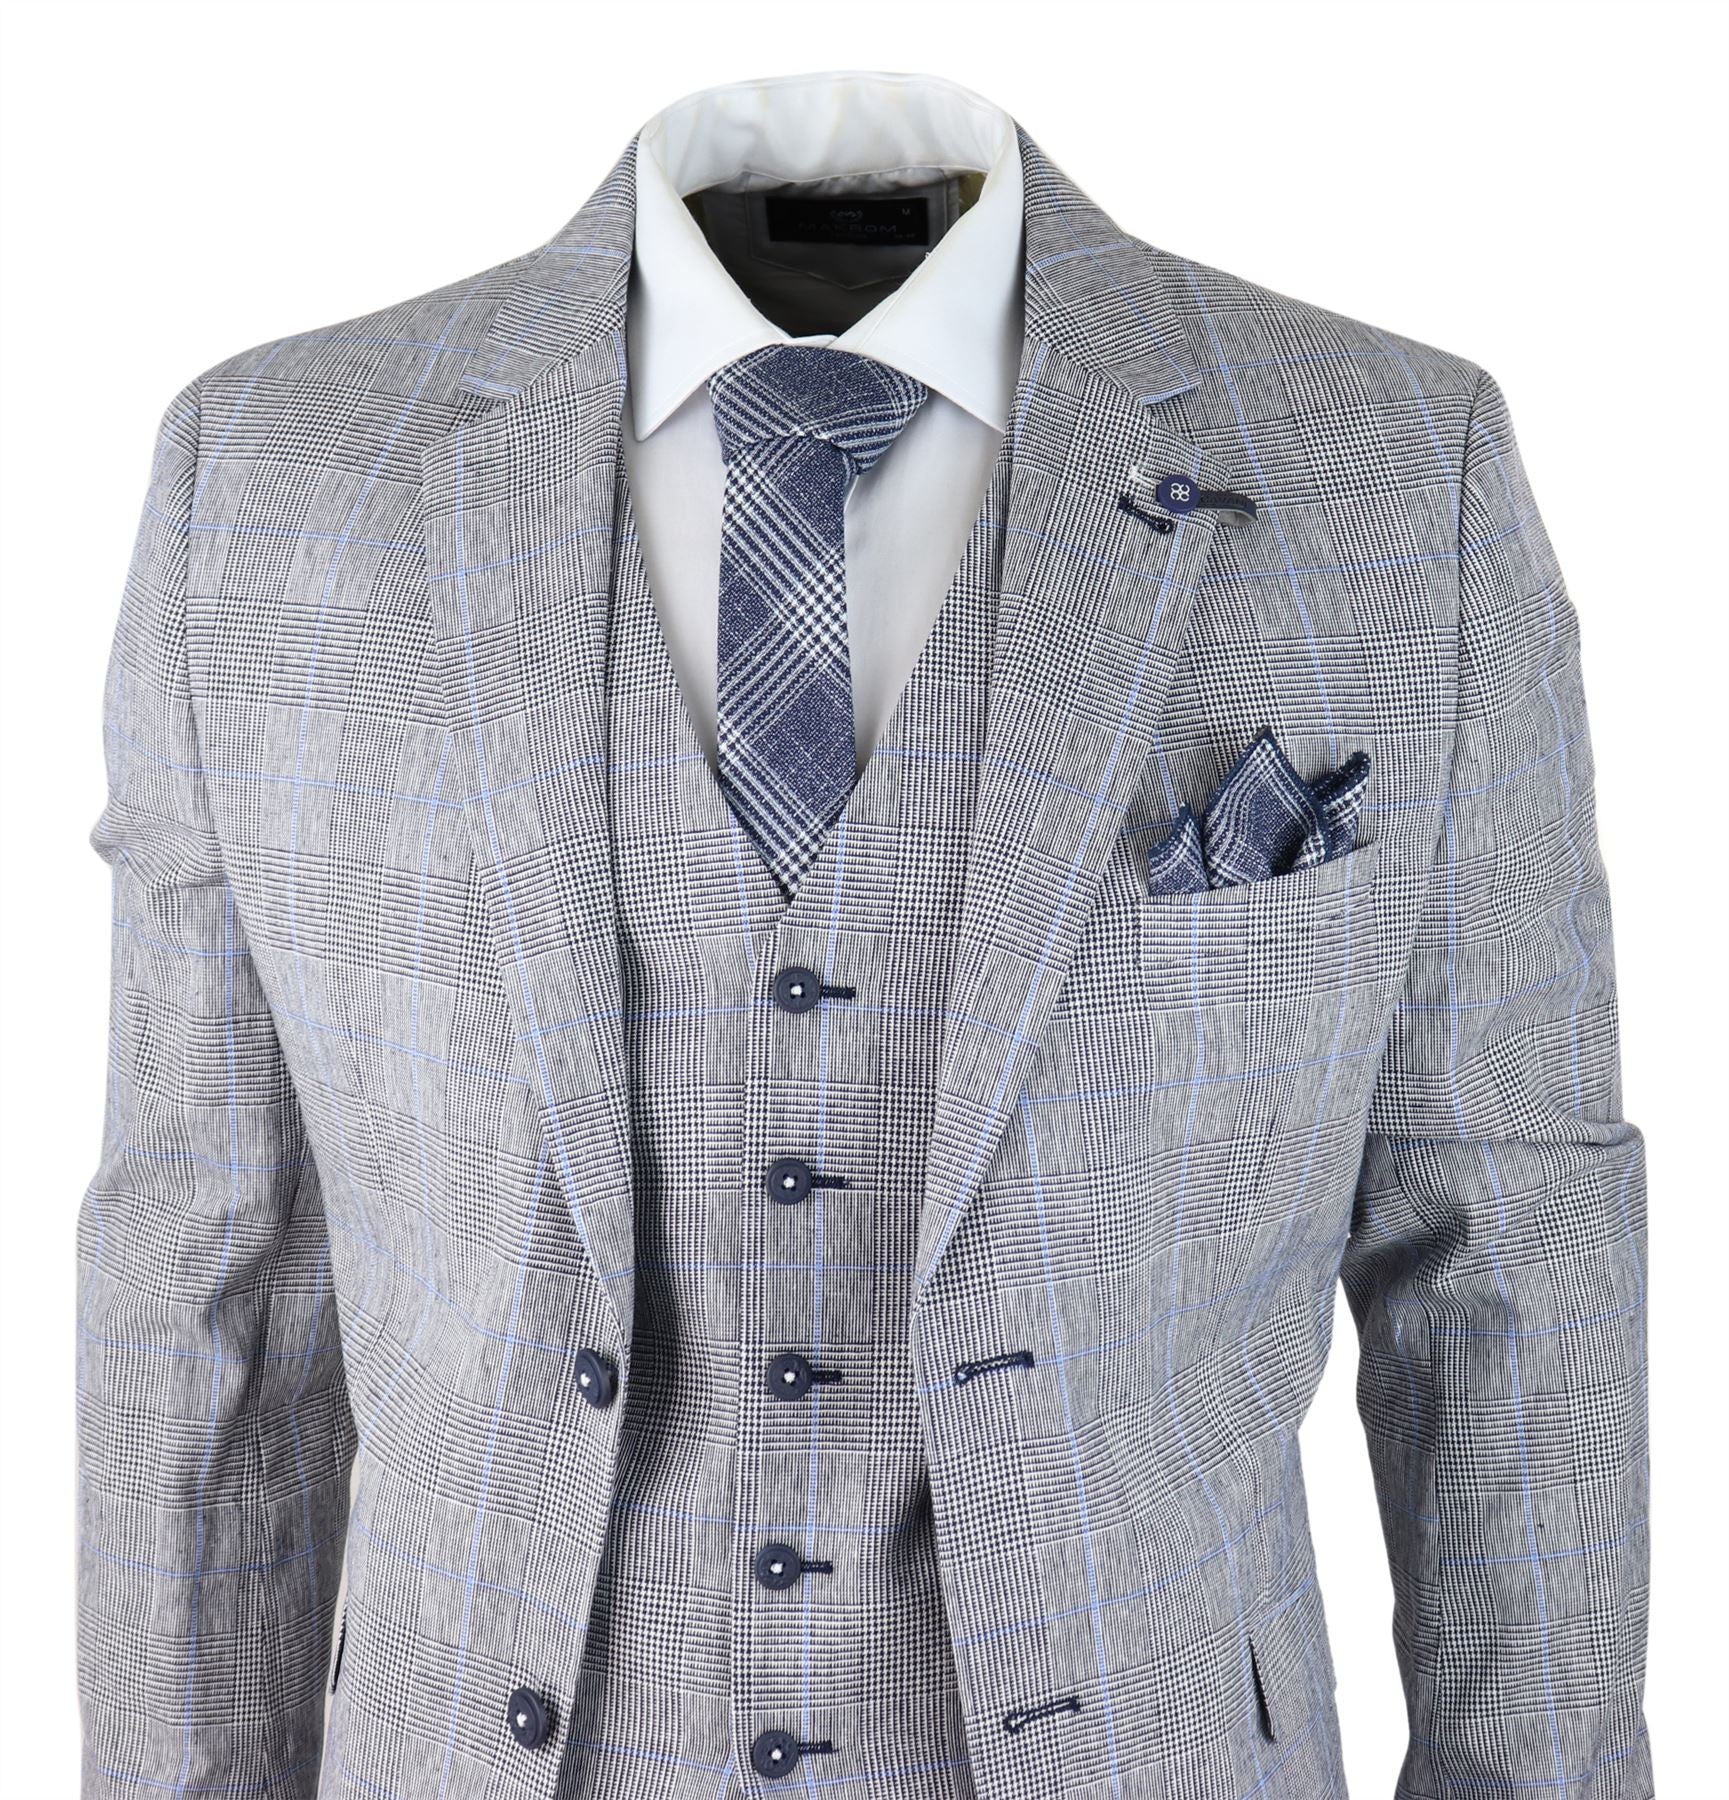 3 Types of Dressing Styles for a Man's Stylish and Formal Classy